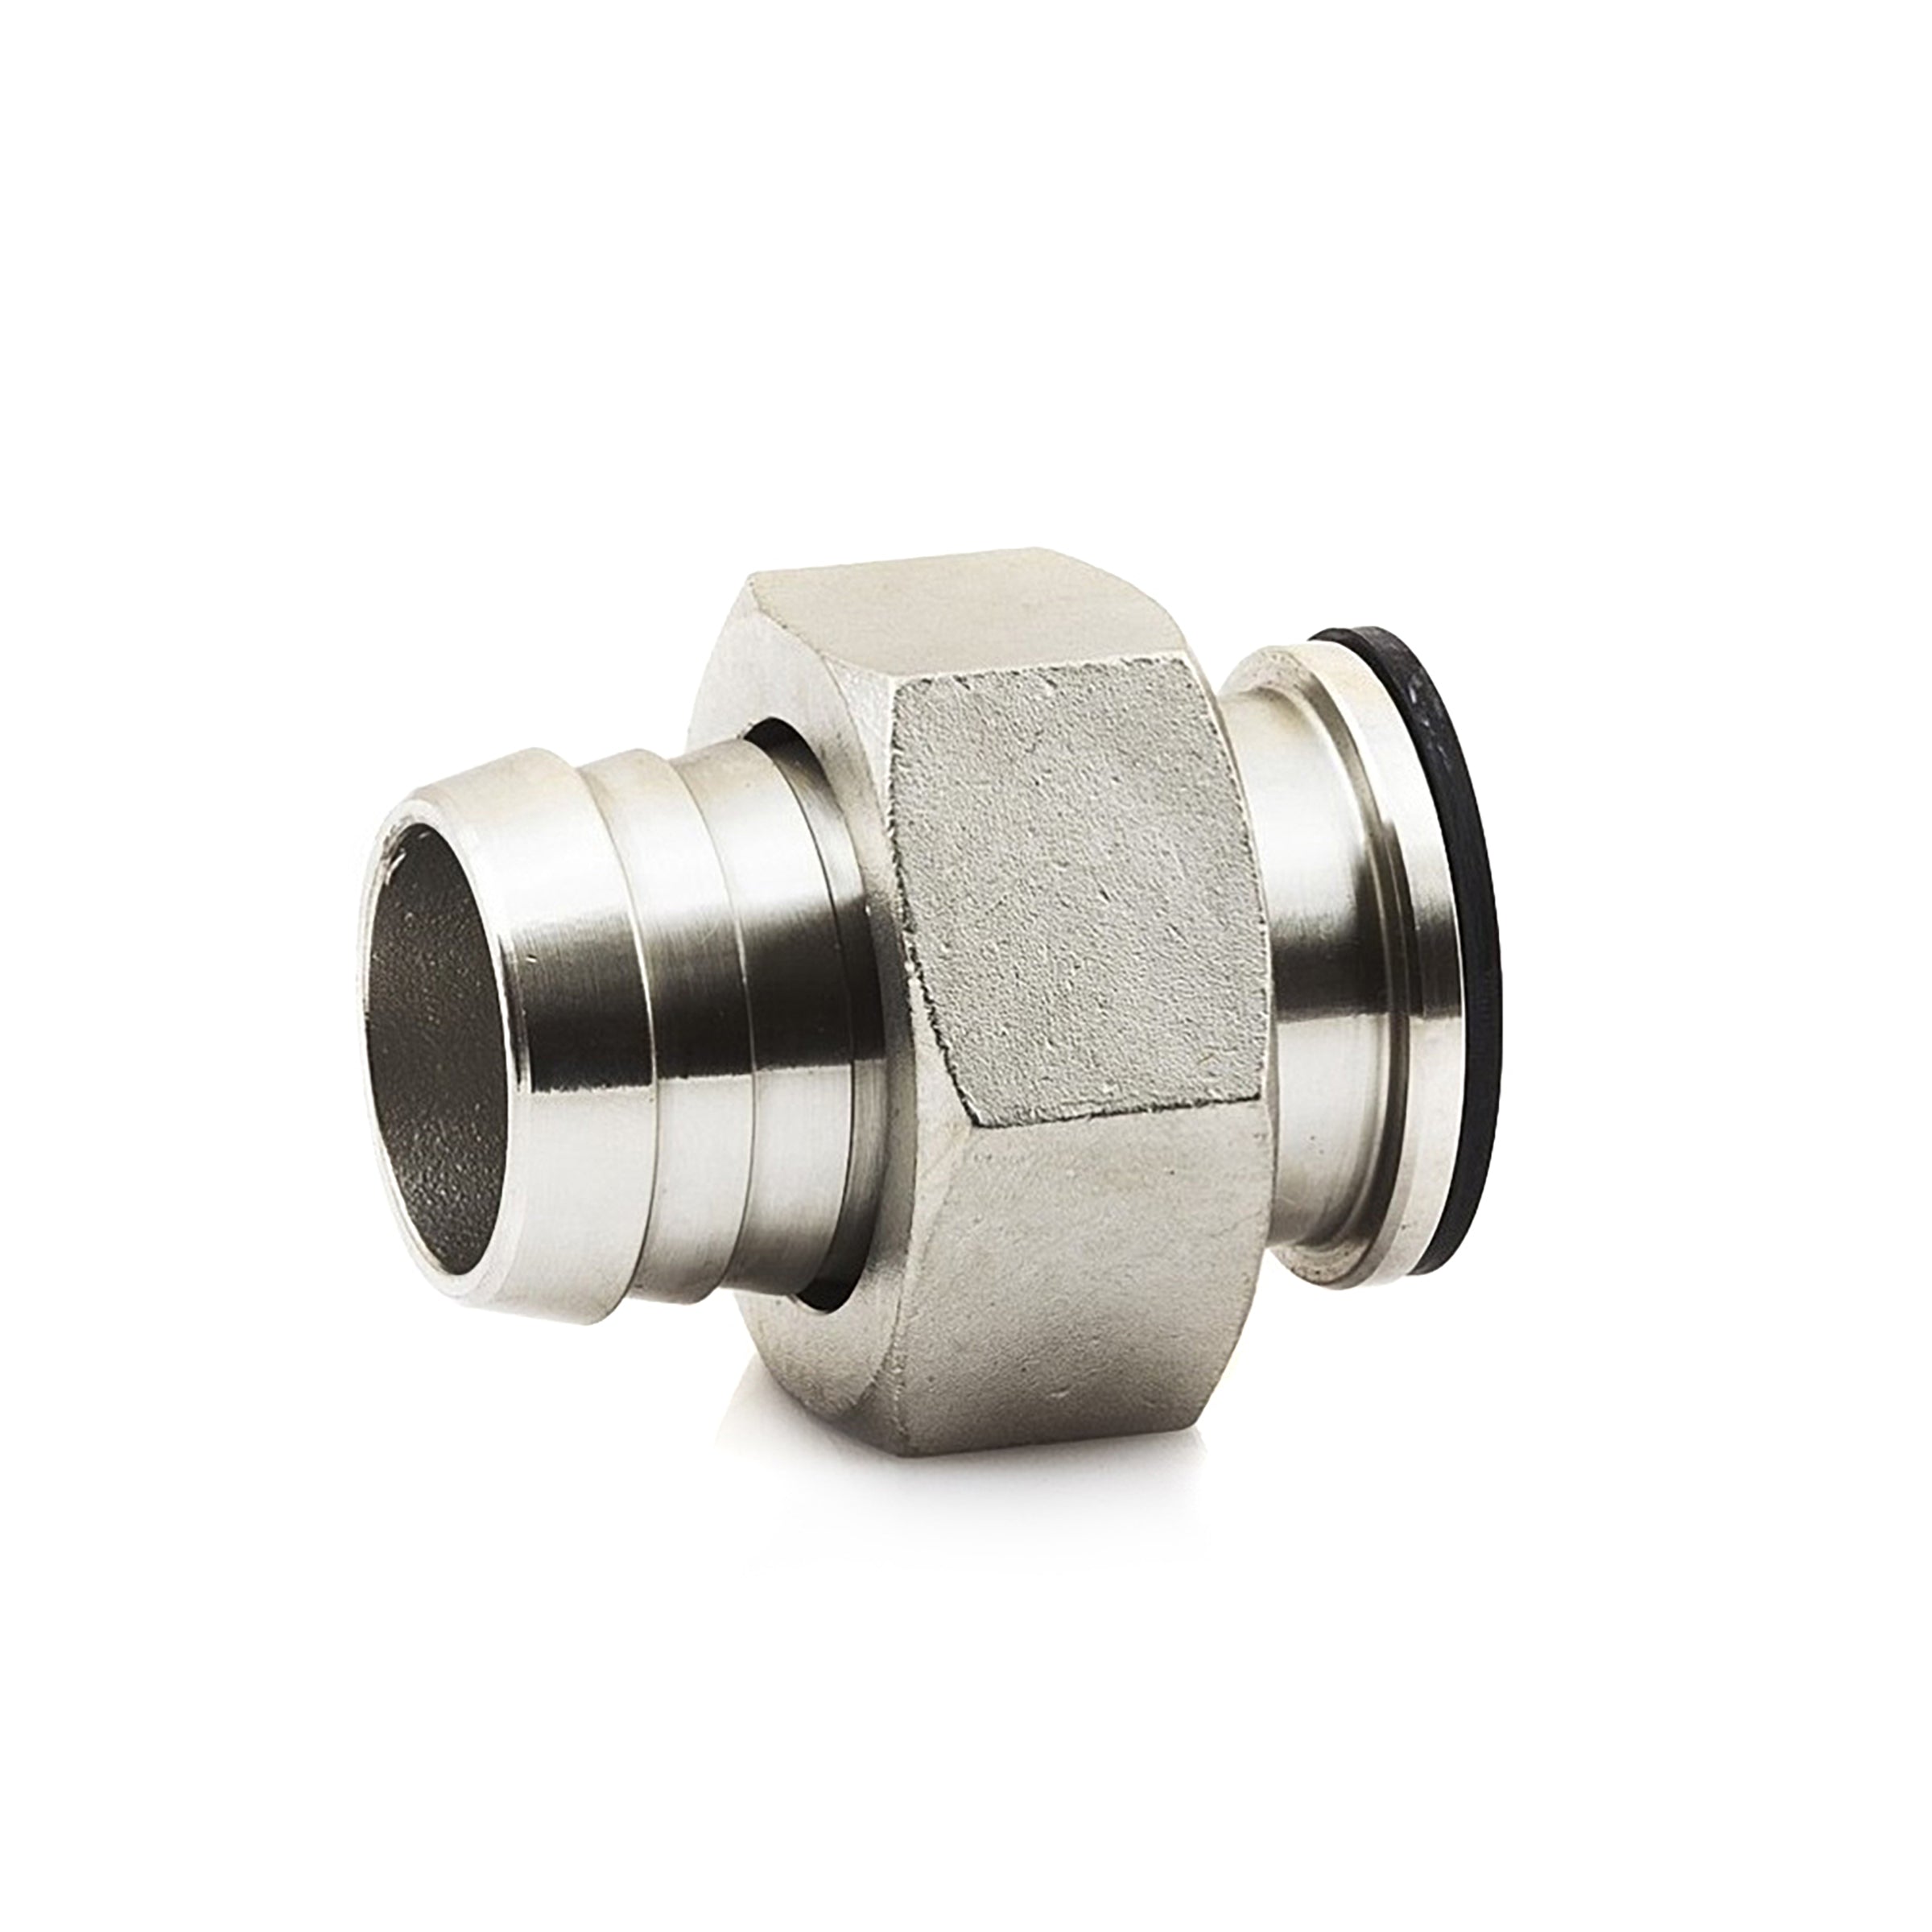 Nut Hose Tail Swivel Pipe Fitting Stainless